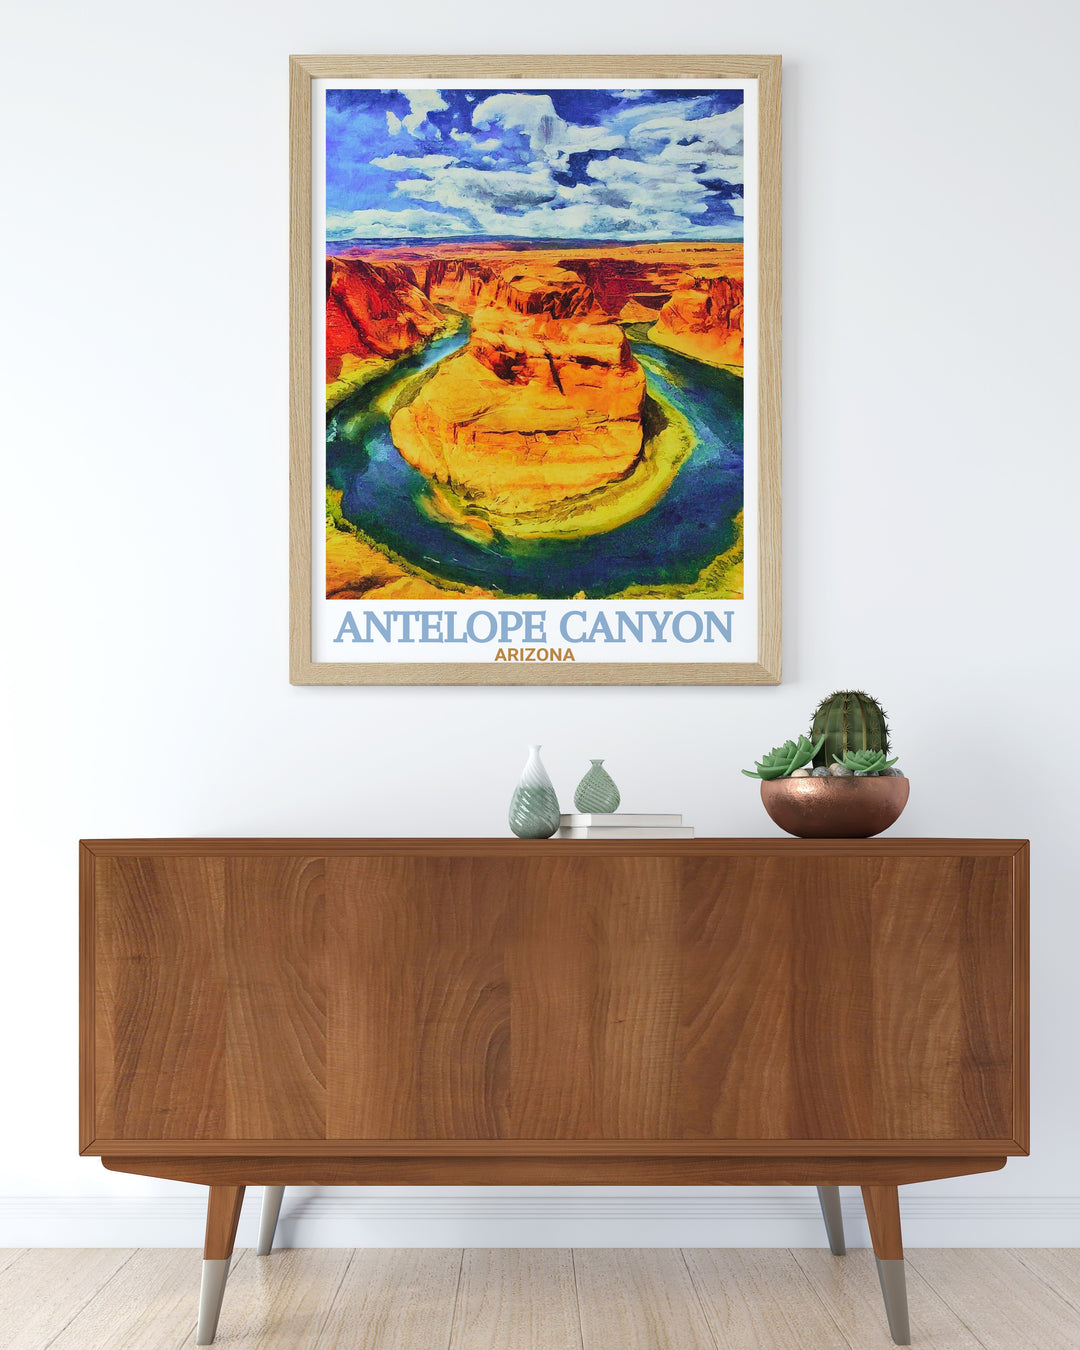 Arizona travel art highlighting the impressive scenery of Horseshoe Bend with its sweeping vistas and rich hues perfect for enhancing any room with a piece of the American Southwest.